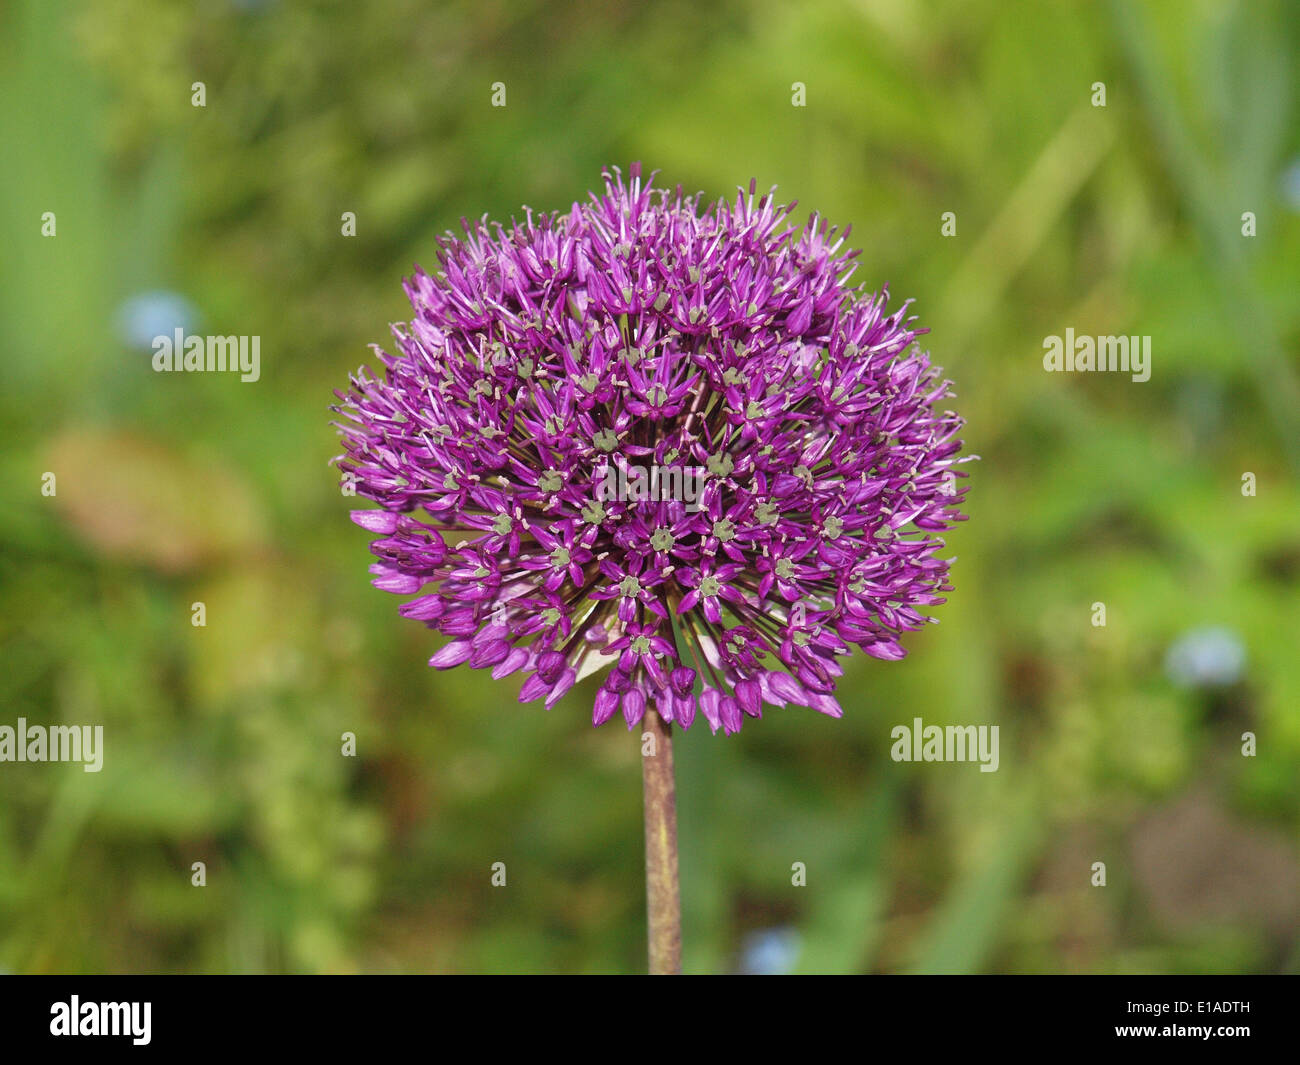 Purple Alium flower forming perfect globe against backdrop of flowergarden with forget-me-nots (Myosotis sylvatica) Stock Photo